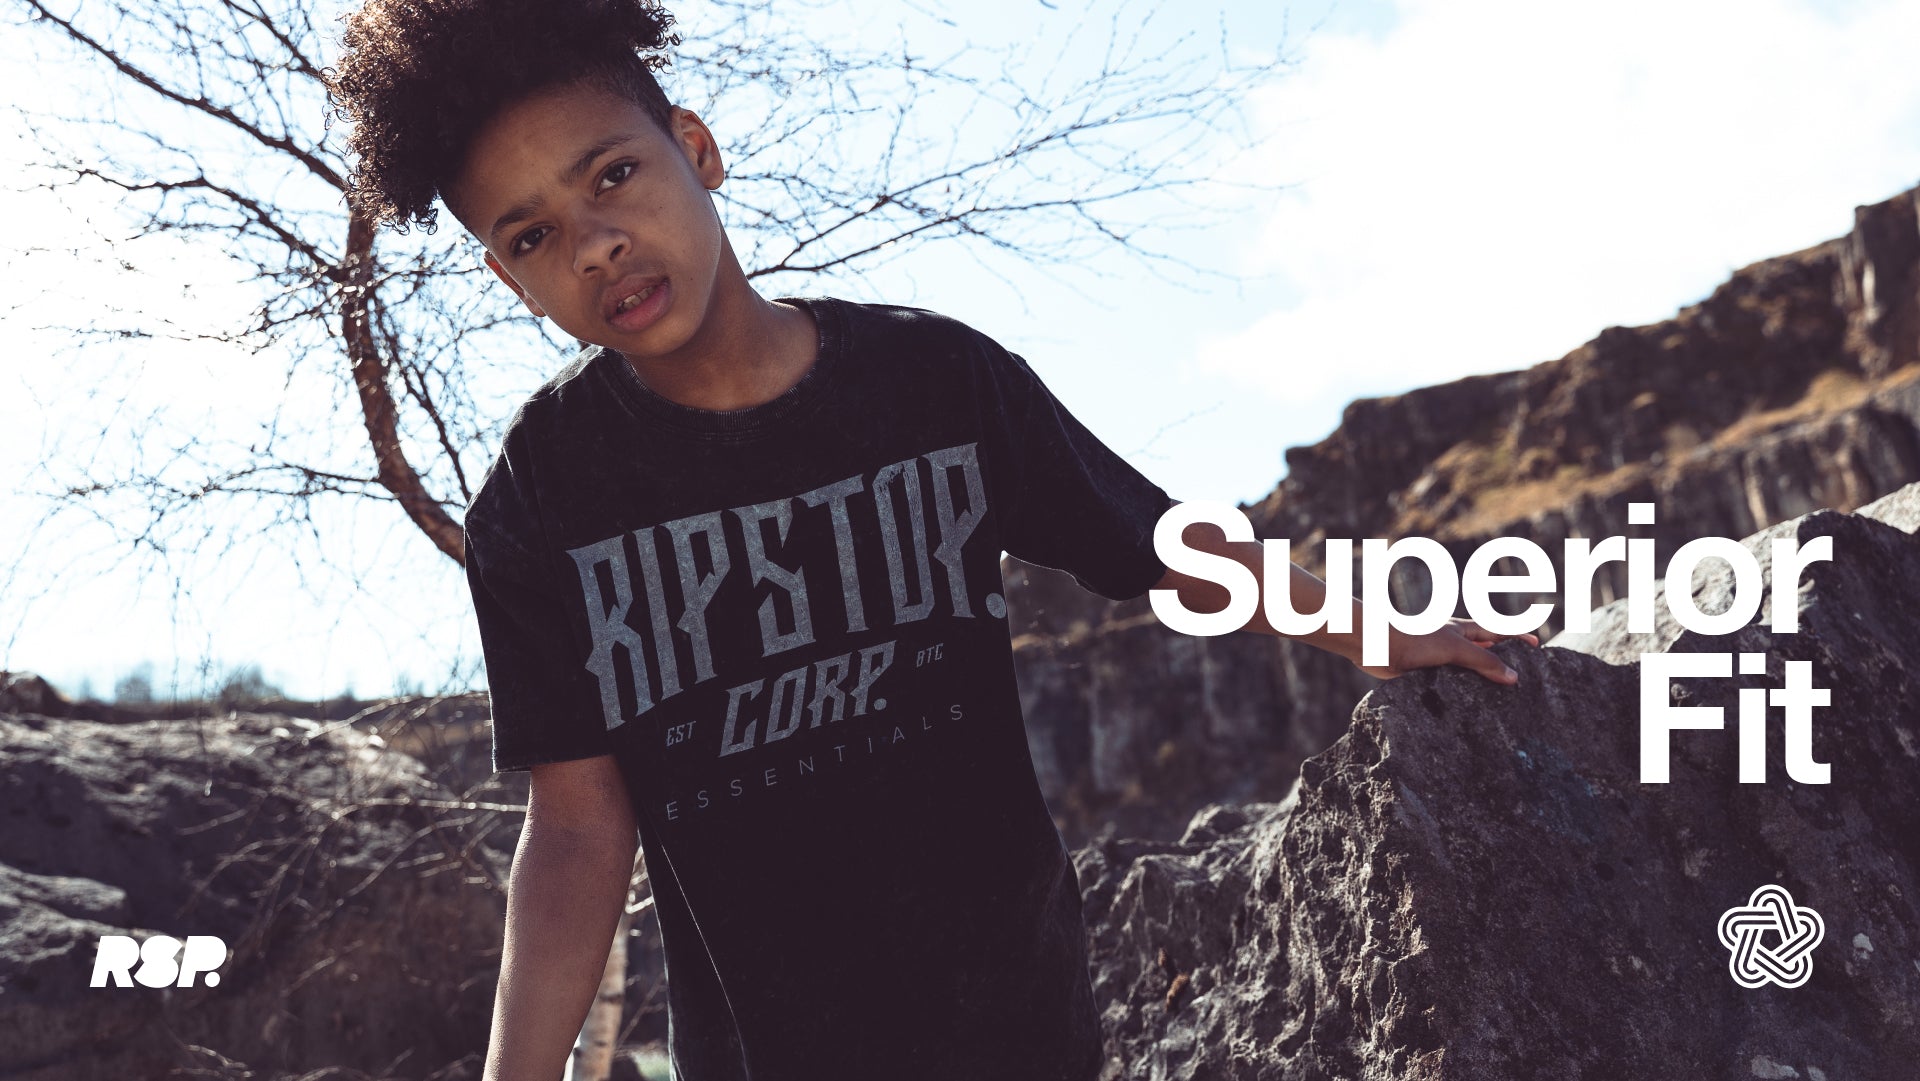 Ripstop Clothing